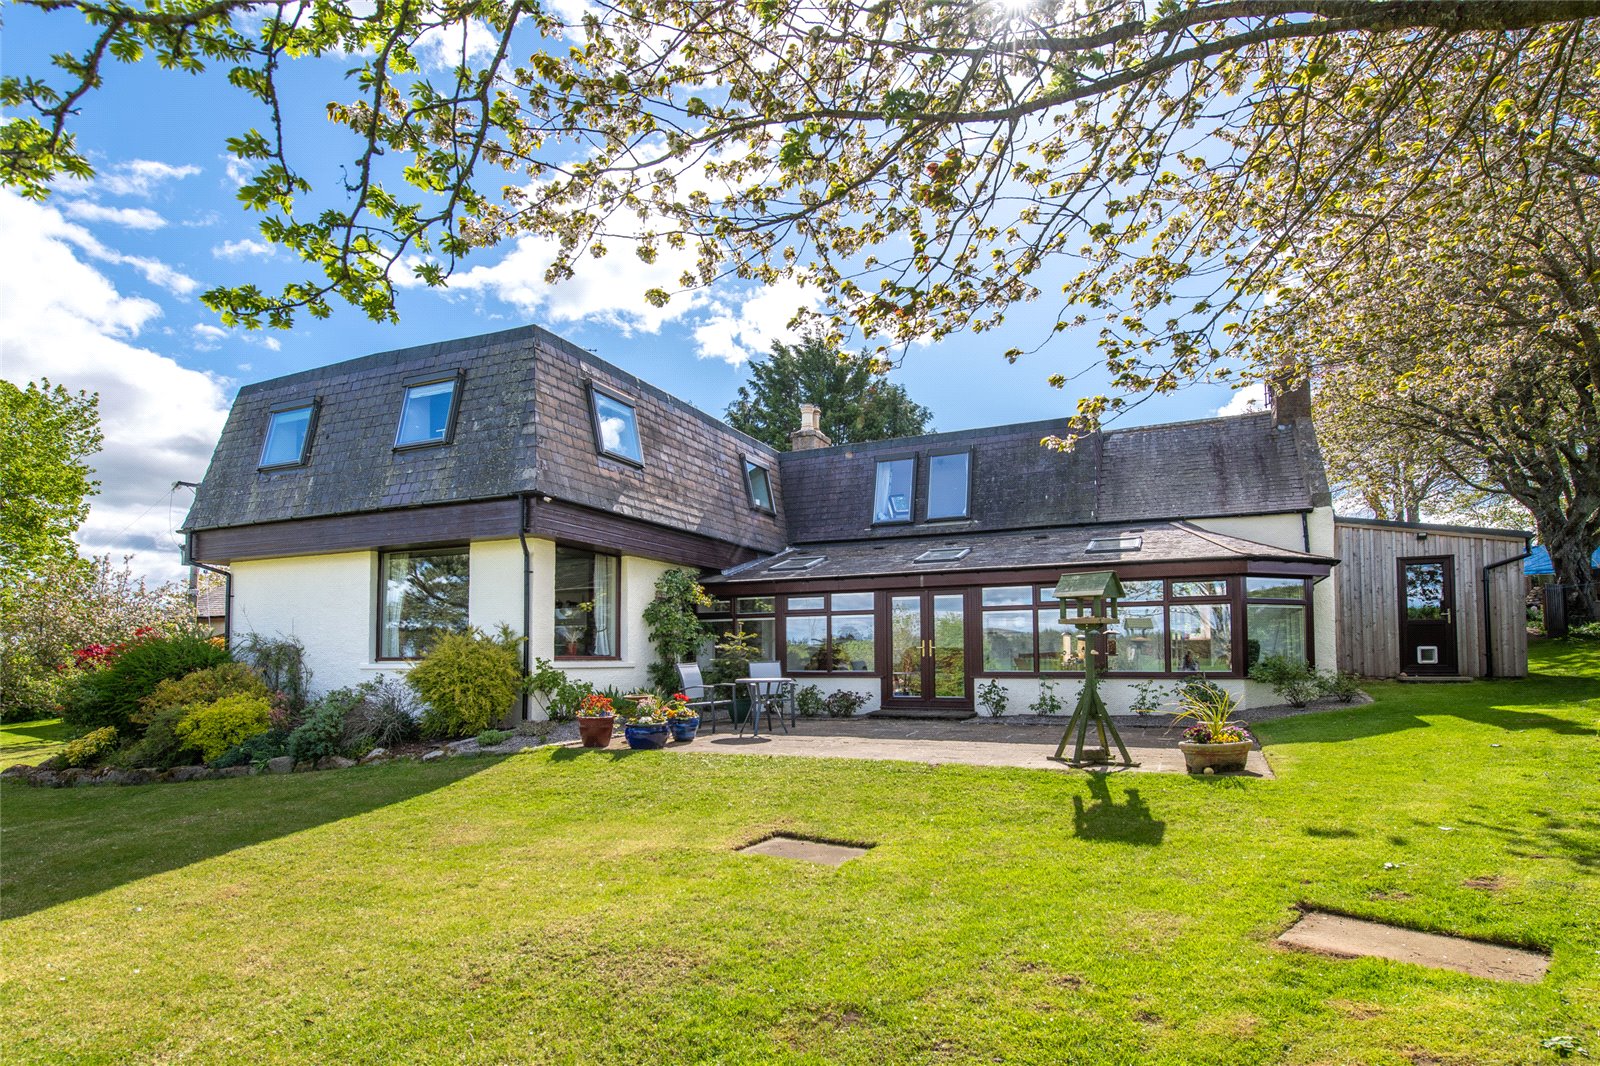 Our latest properties for sale or to let (24th May 2022)